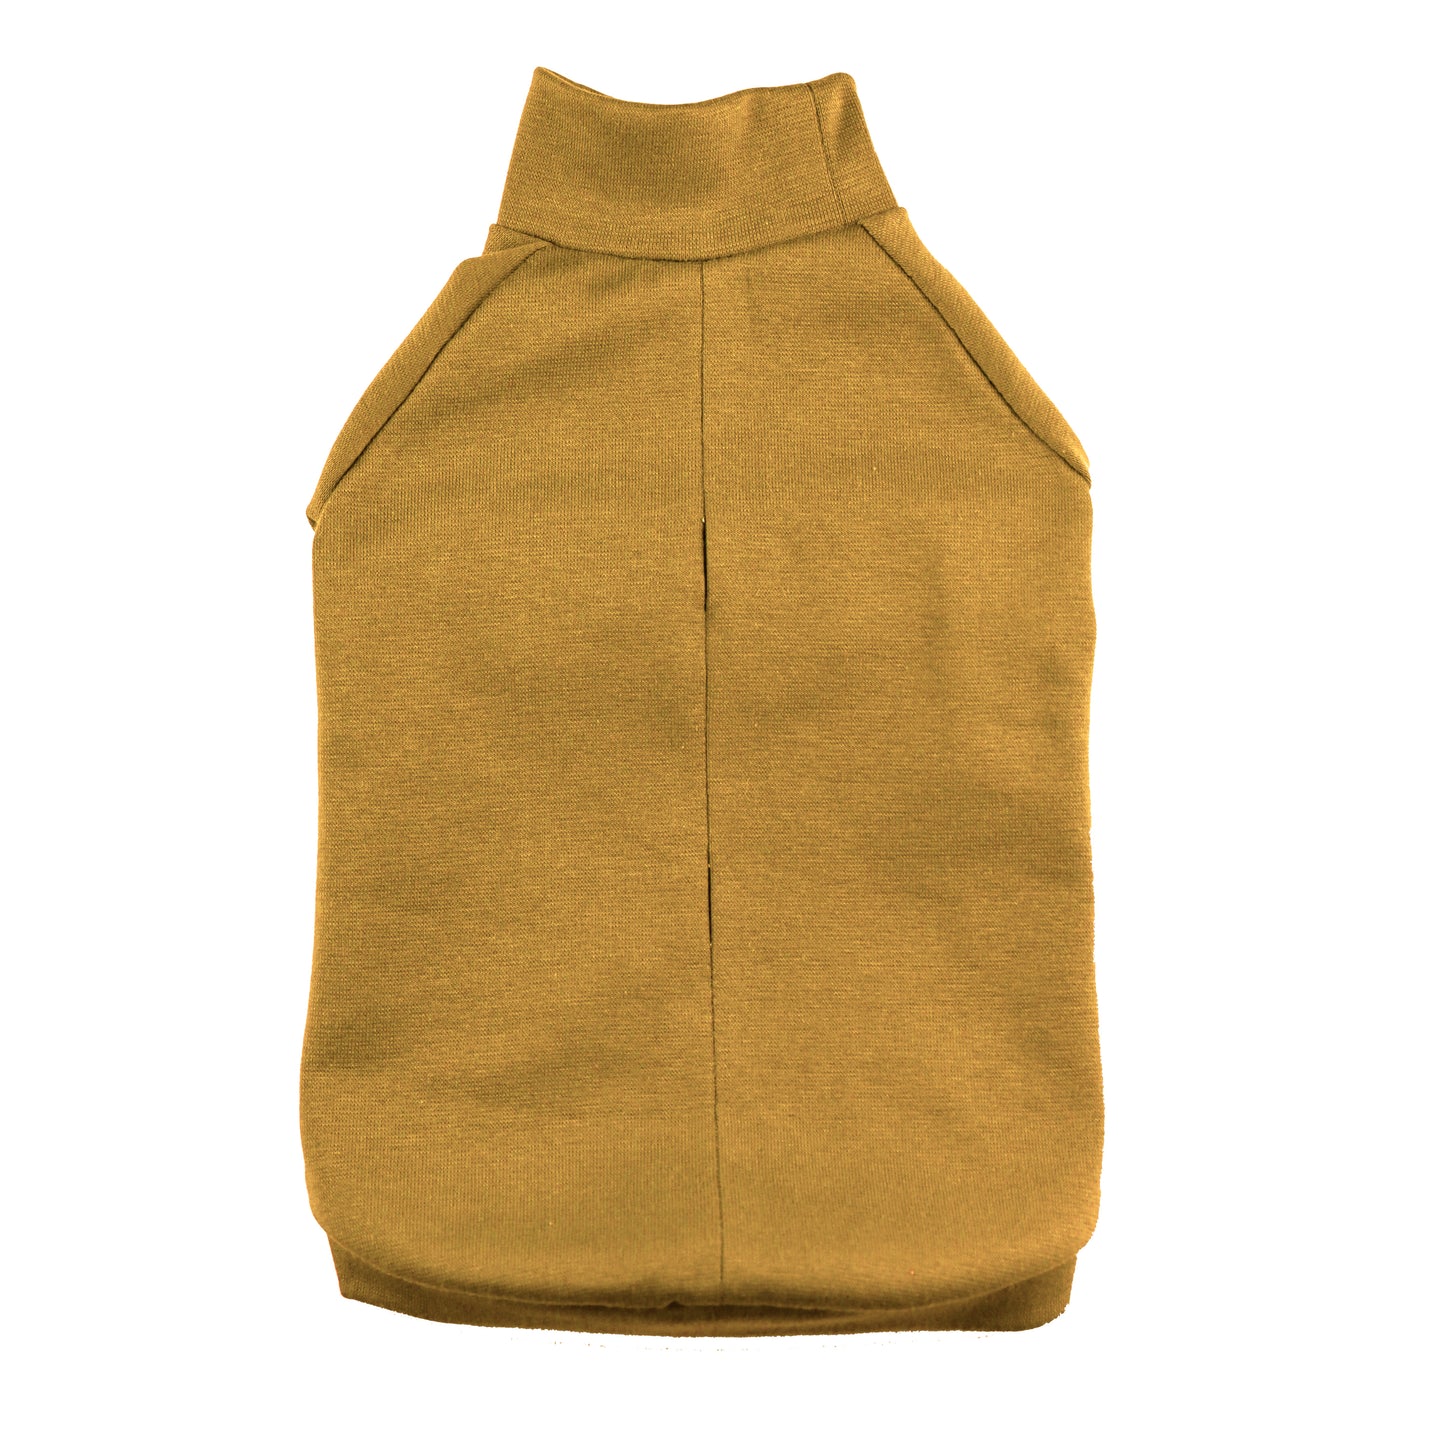 Mustard yellow cotton sweater for Cat. Turtleneck for Sphynx and all cats breeds